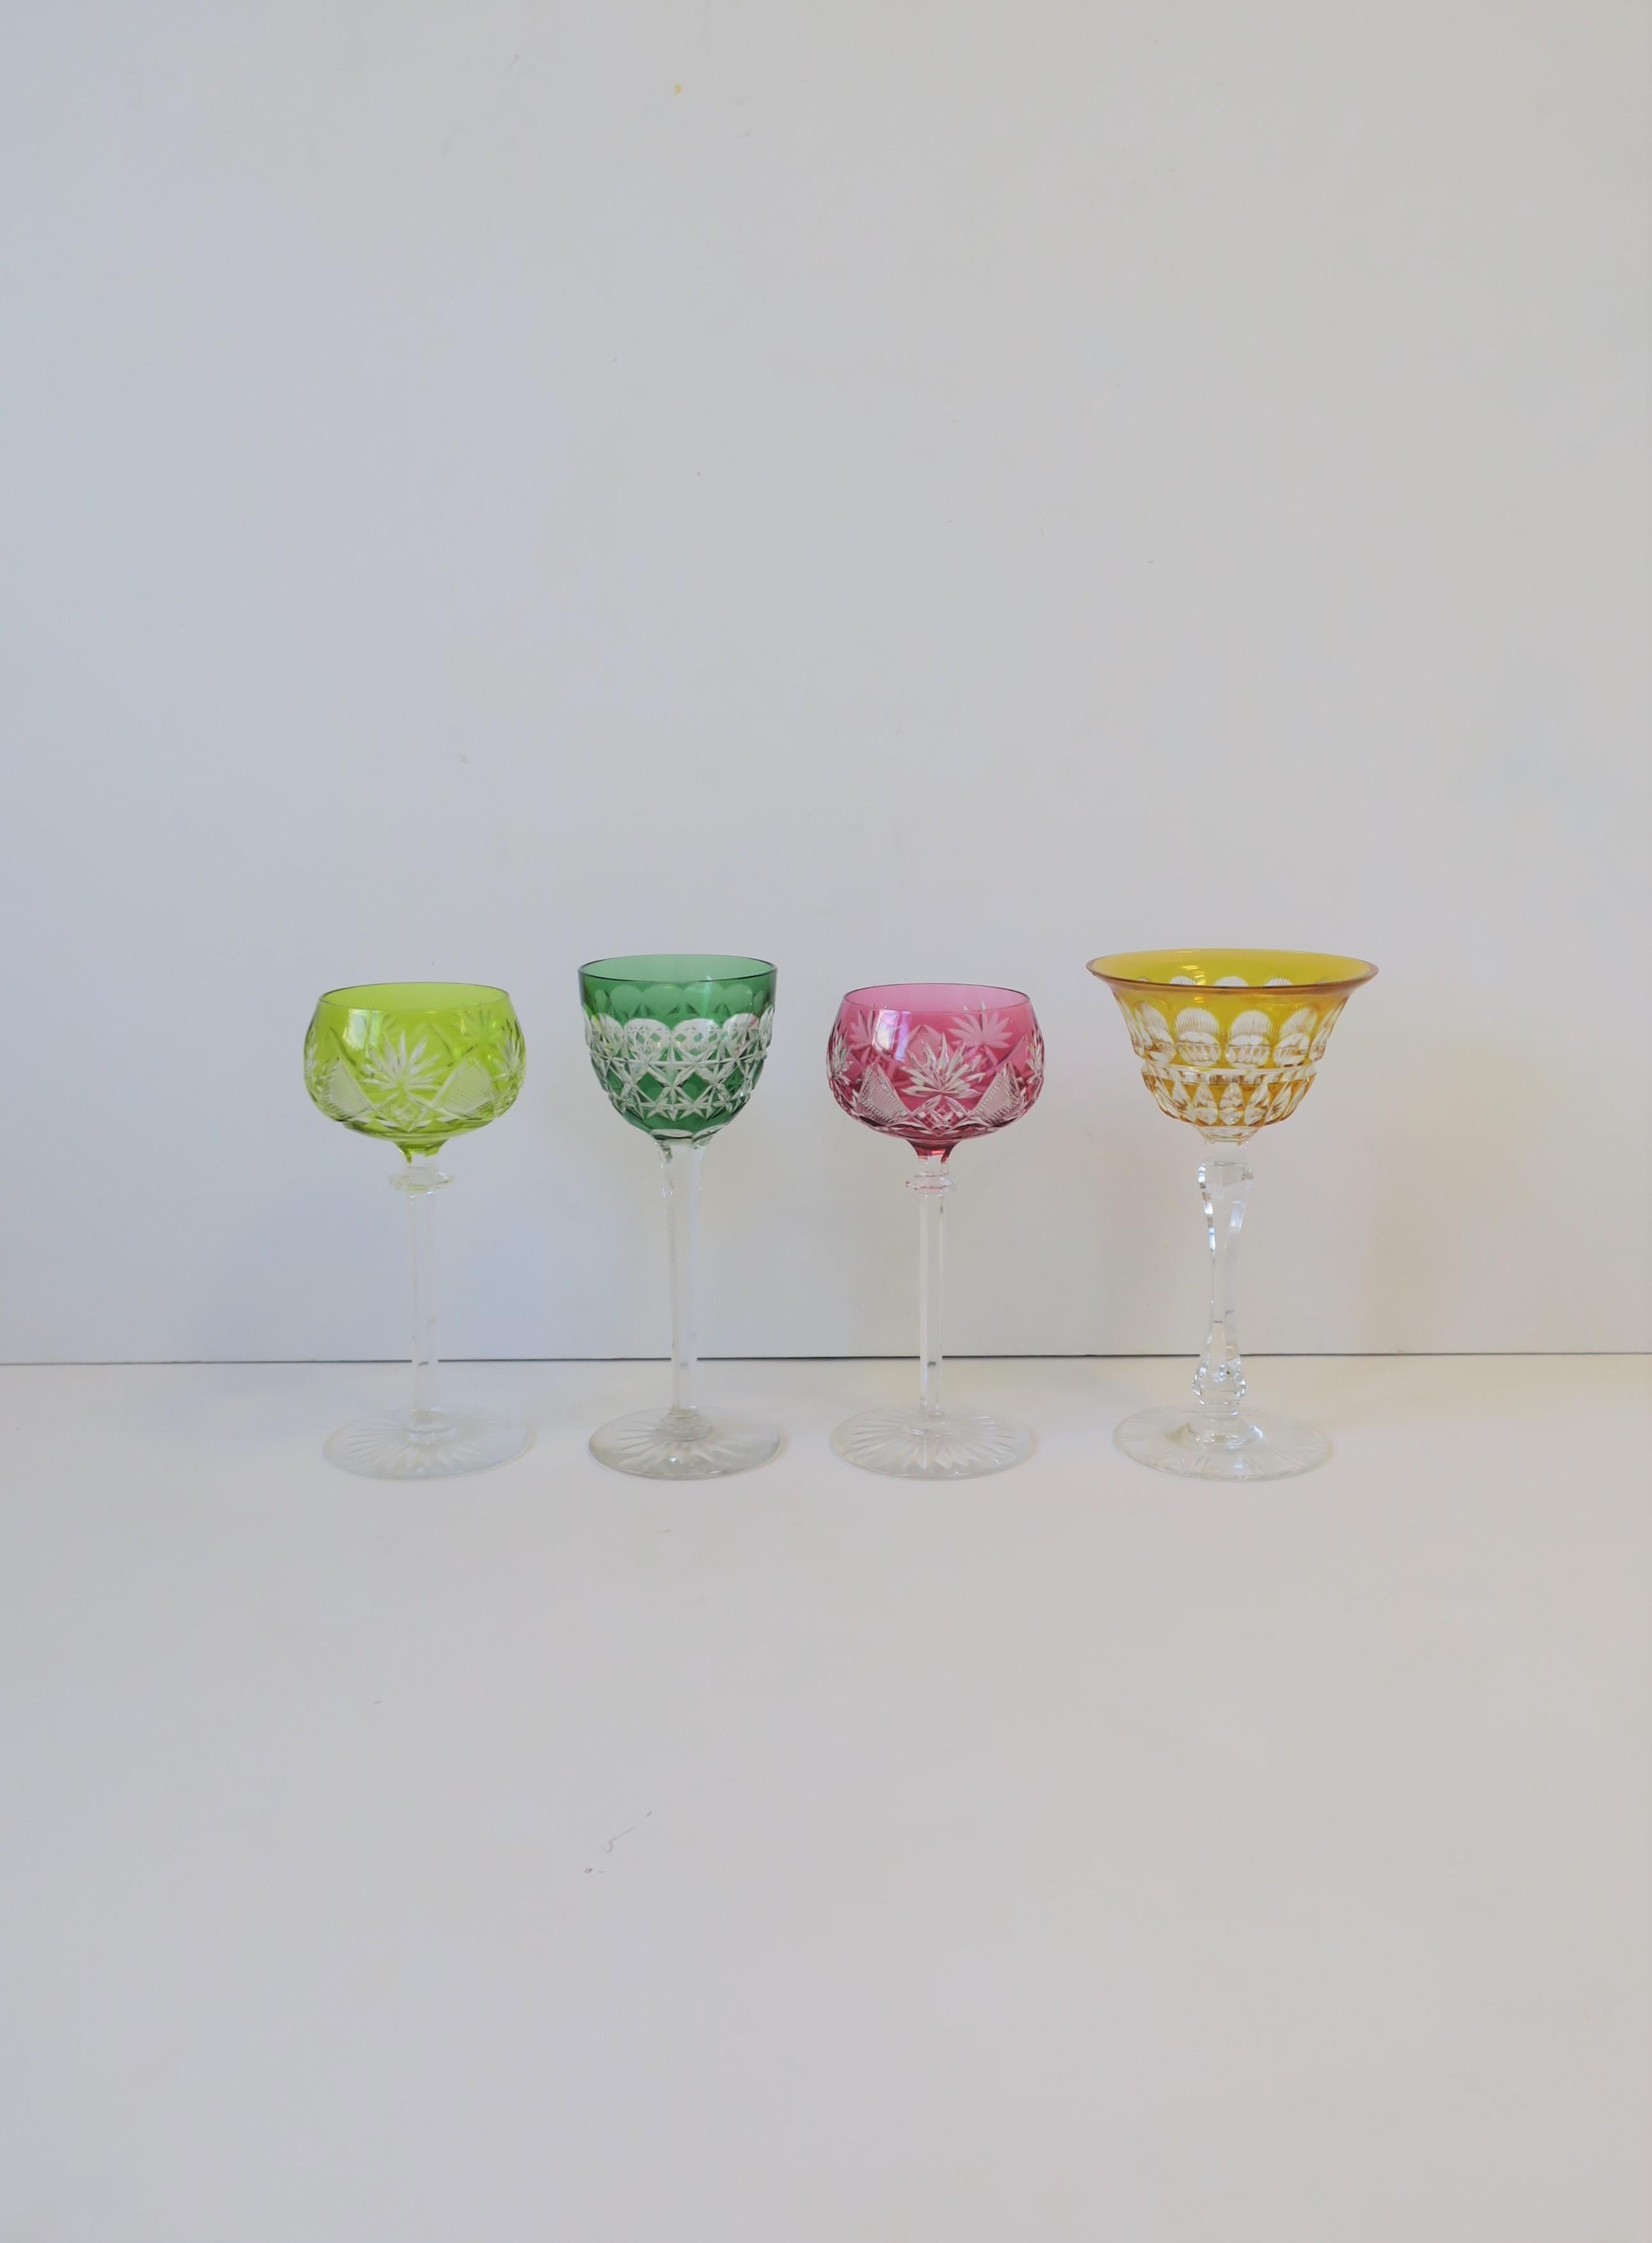 A very beautiful set of 4 brightly colored 'cut -to-clear' mid-20th century Bohemian crystal cocktail glassware stemware in the style of luxury makers, Val St Lambert, Baccarat, or Saint-Louise, circa 1960s, Europe, Czechoslovakia. Each glass is